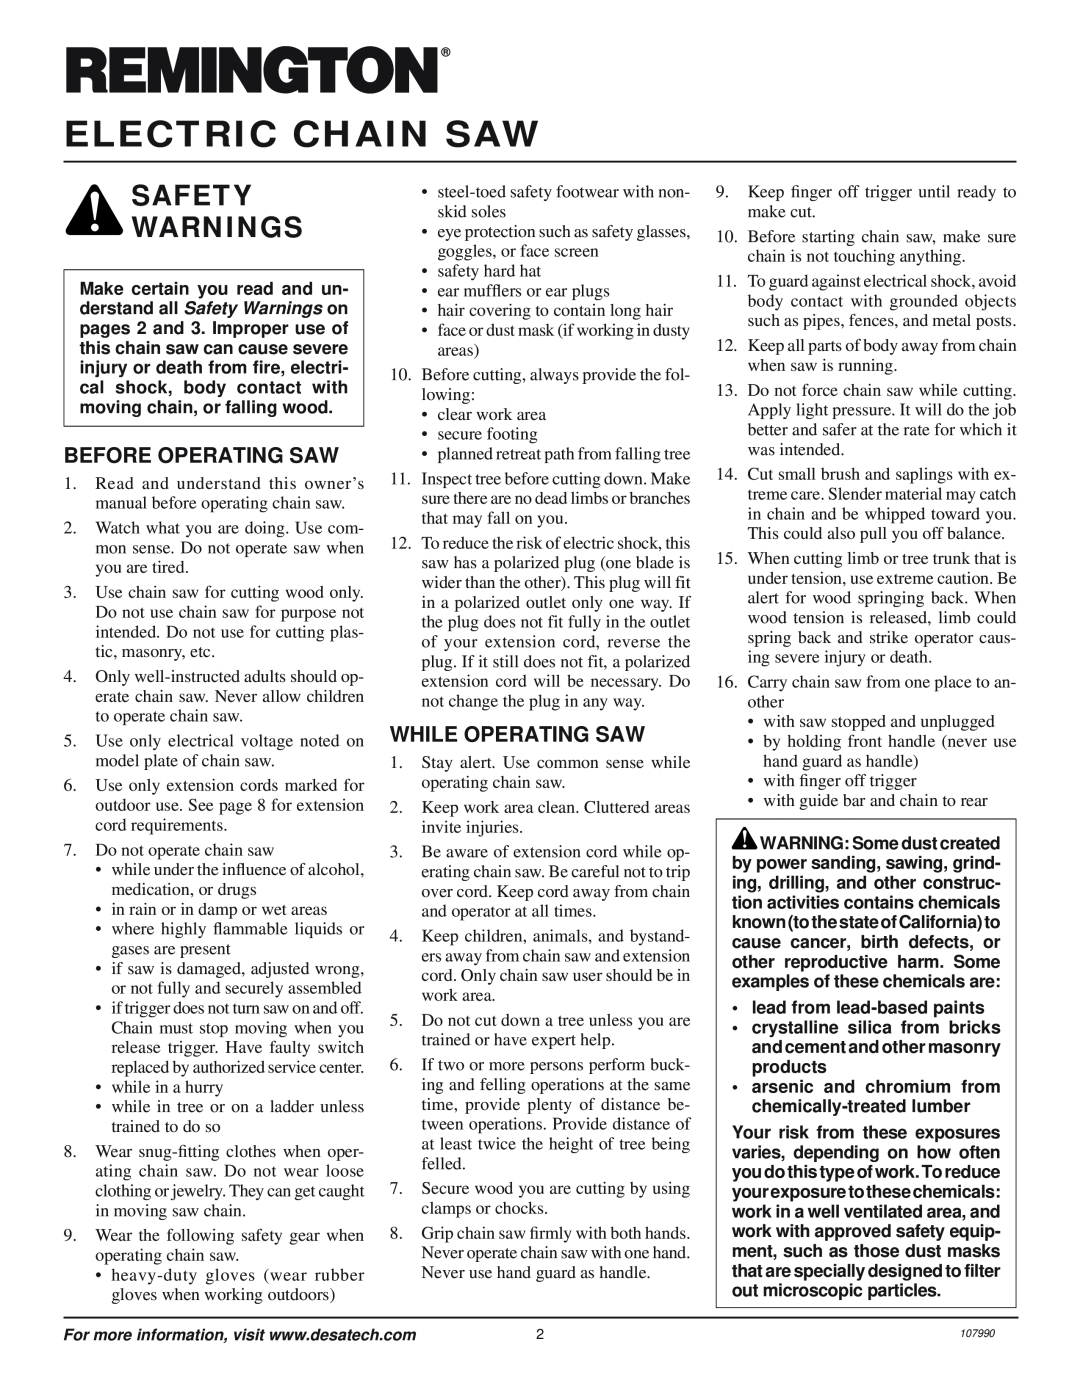 Desa & 099039J, LNT-2: 076728K, 100089-07 Electric Chain Saw, Safety Warnings, Before Operating Saw, While Operating Saw 